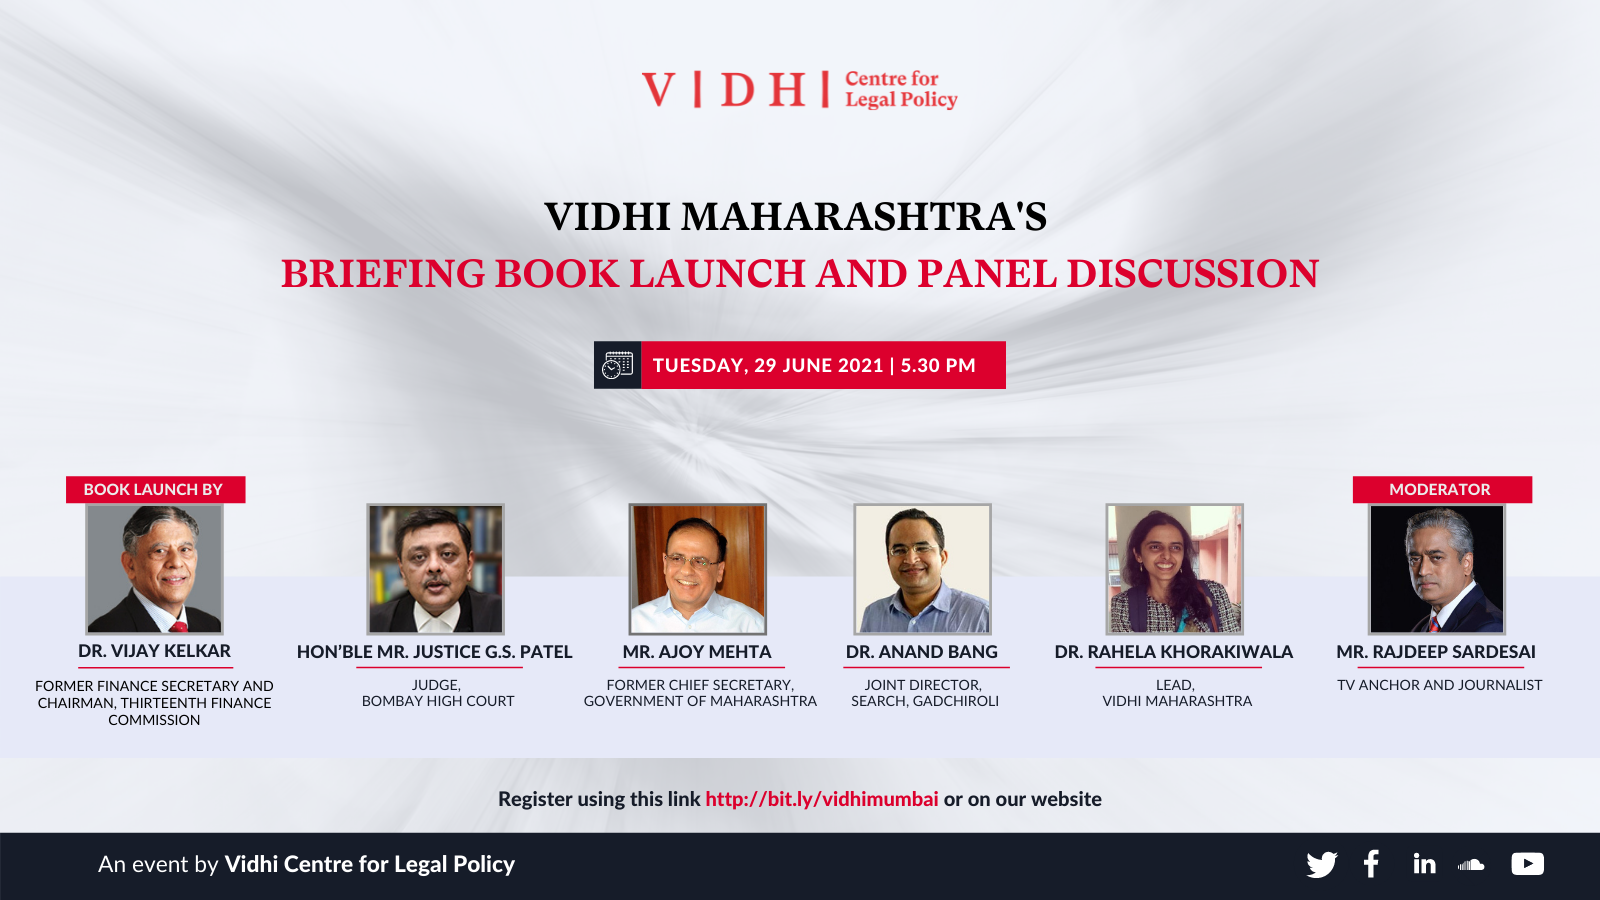 Launch Of Vidhi Maharashtras Briefing Book On Fifteen Suggested Legal Reforms For Maharashtra